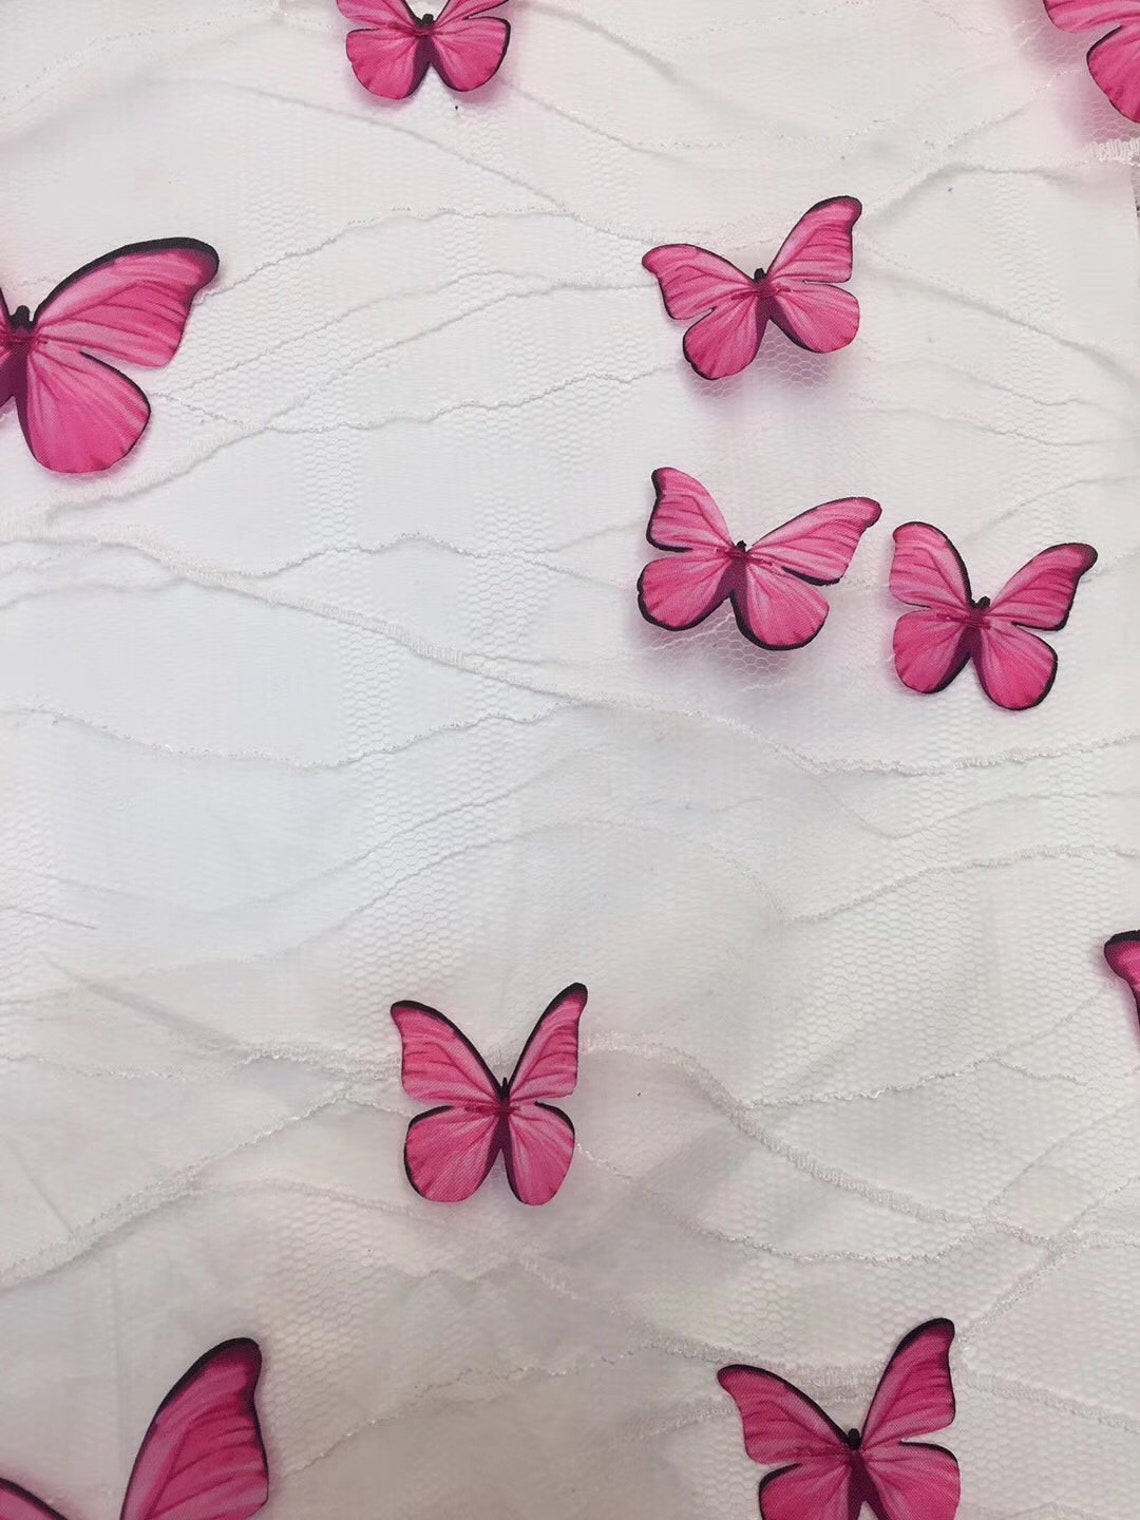 5 Yards 3D Butterfly Tulle Lace Fabric Hot Pink Butterfly | Etsy